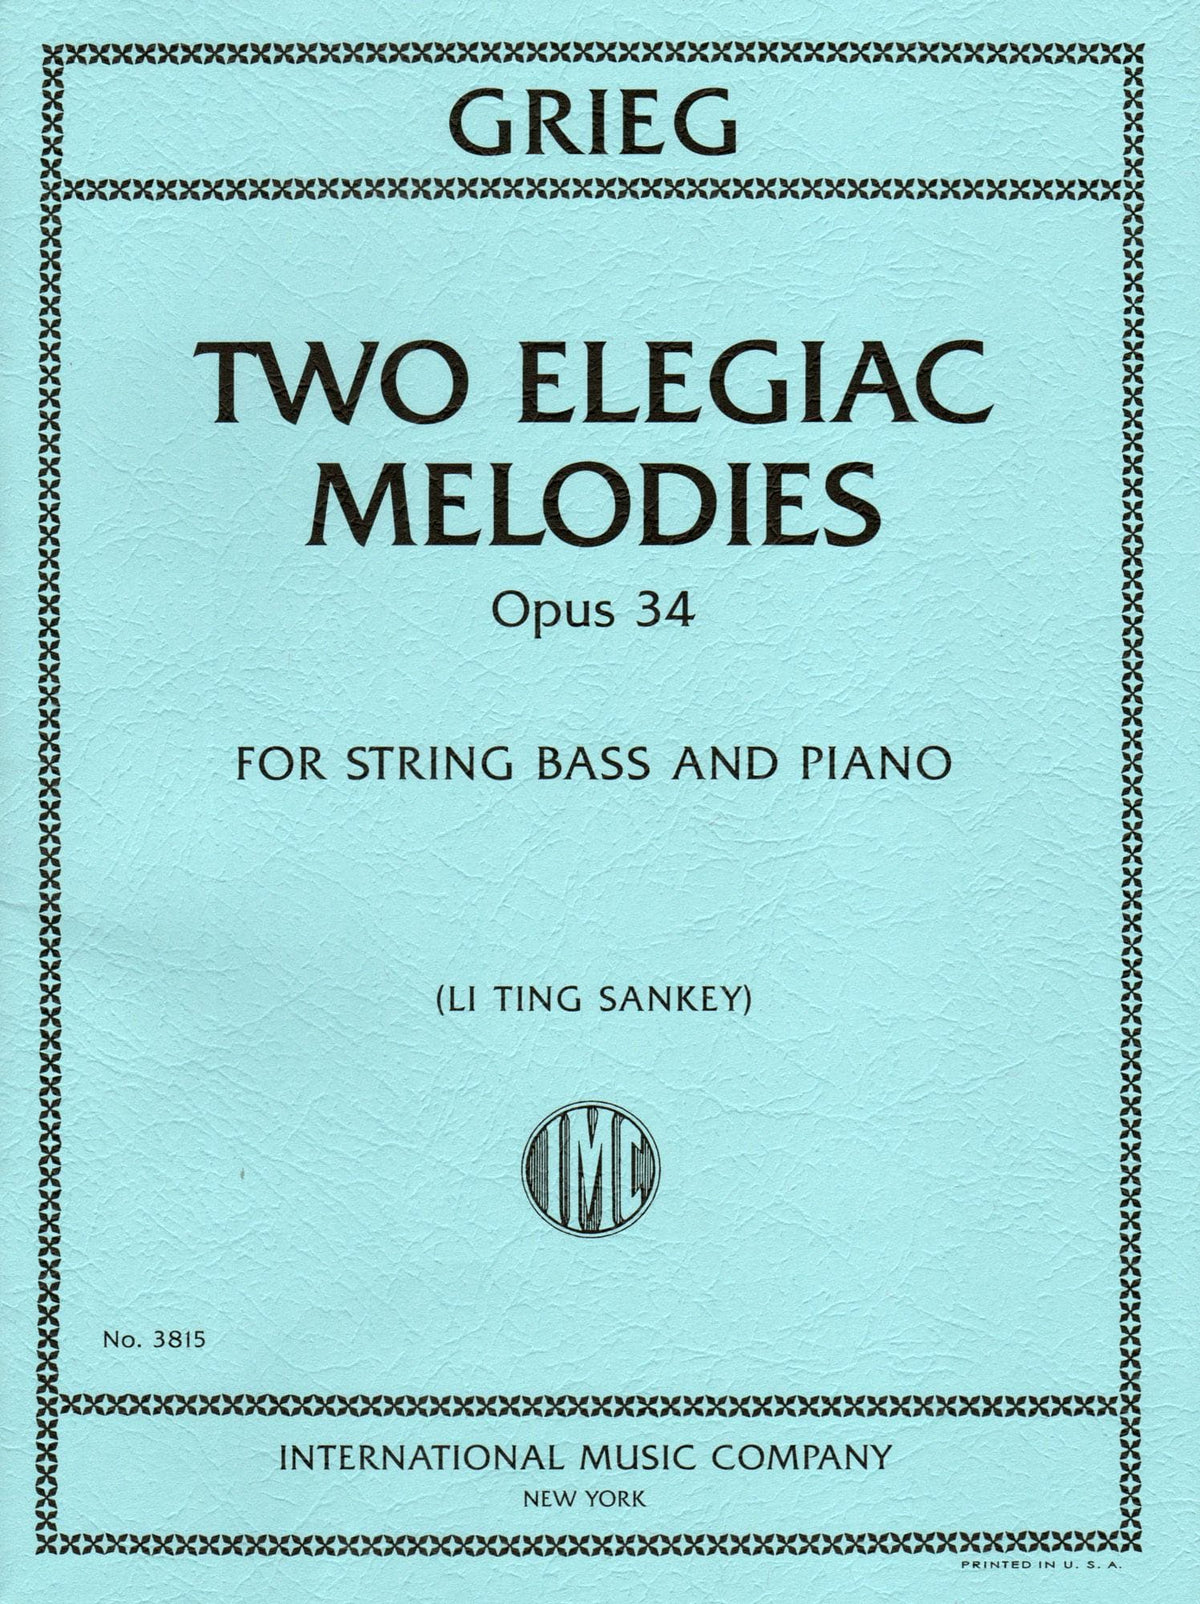 Grieg, Edvard - Two Elegiac Melodies, Op 34 - for Double Bass and Piano - Edited by Sankey - International Edition